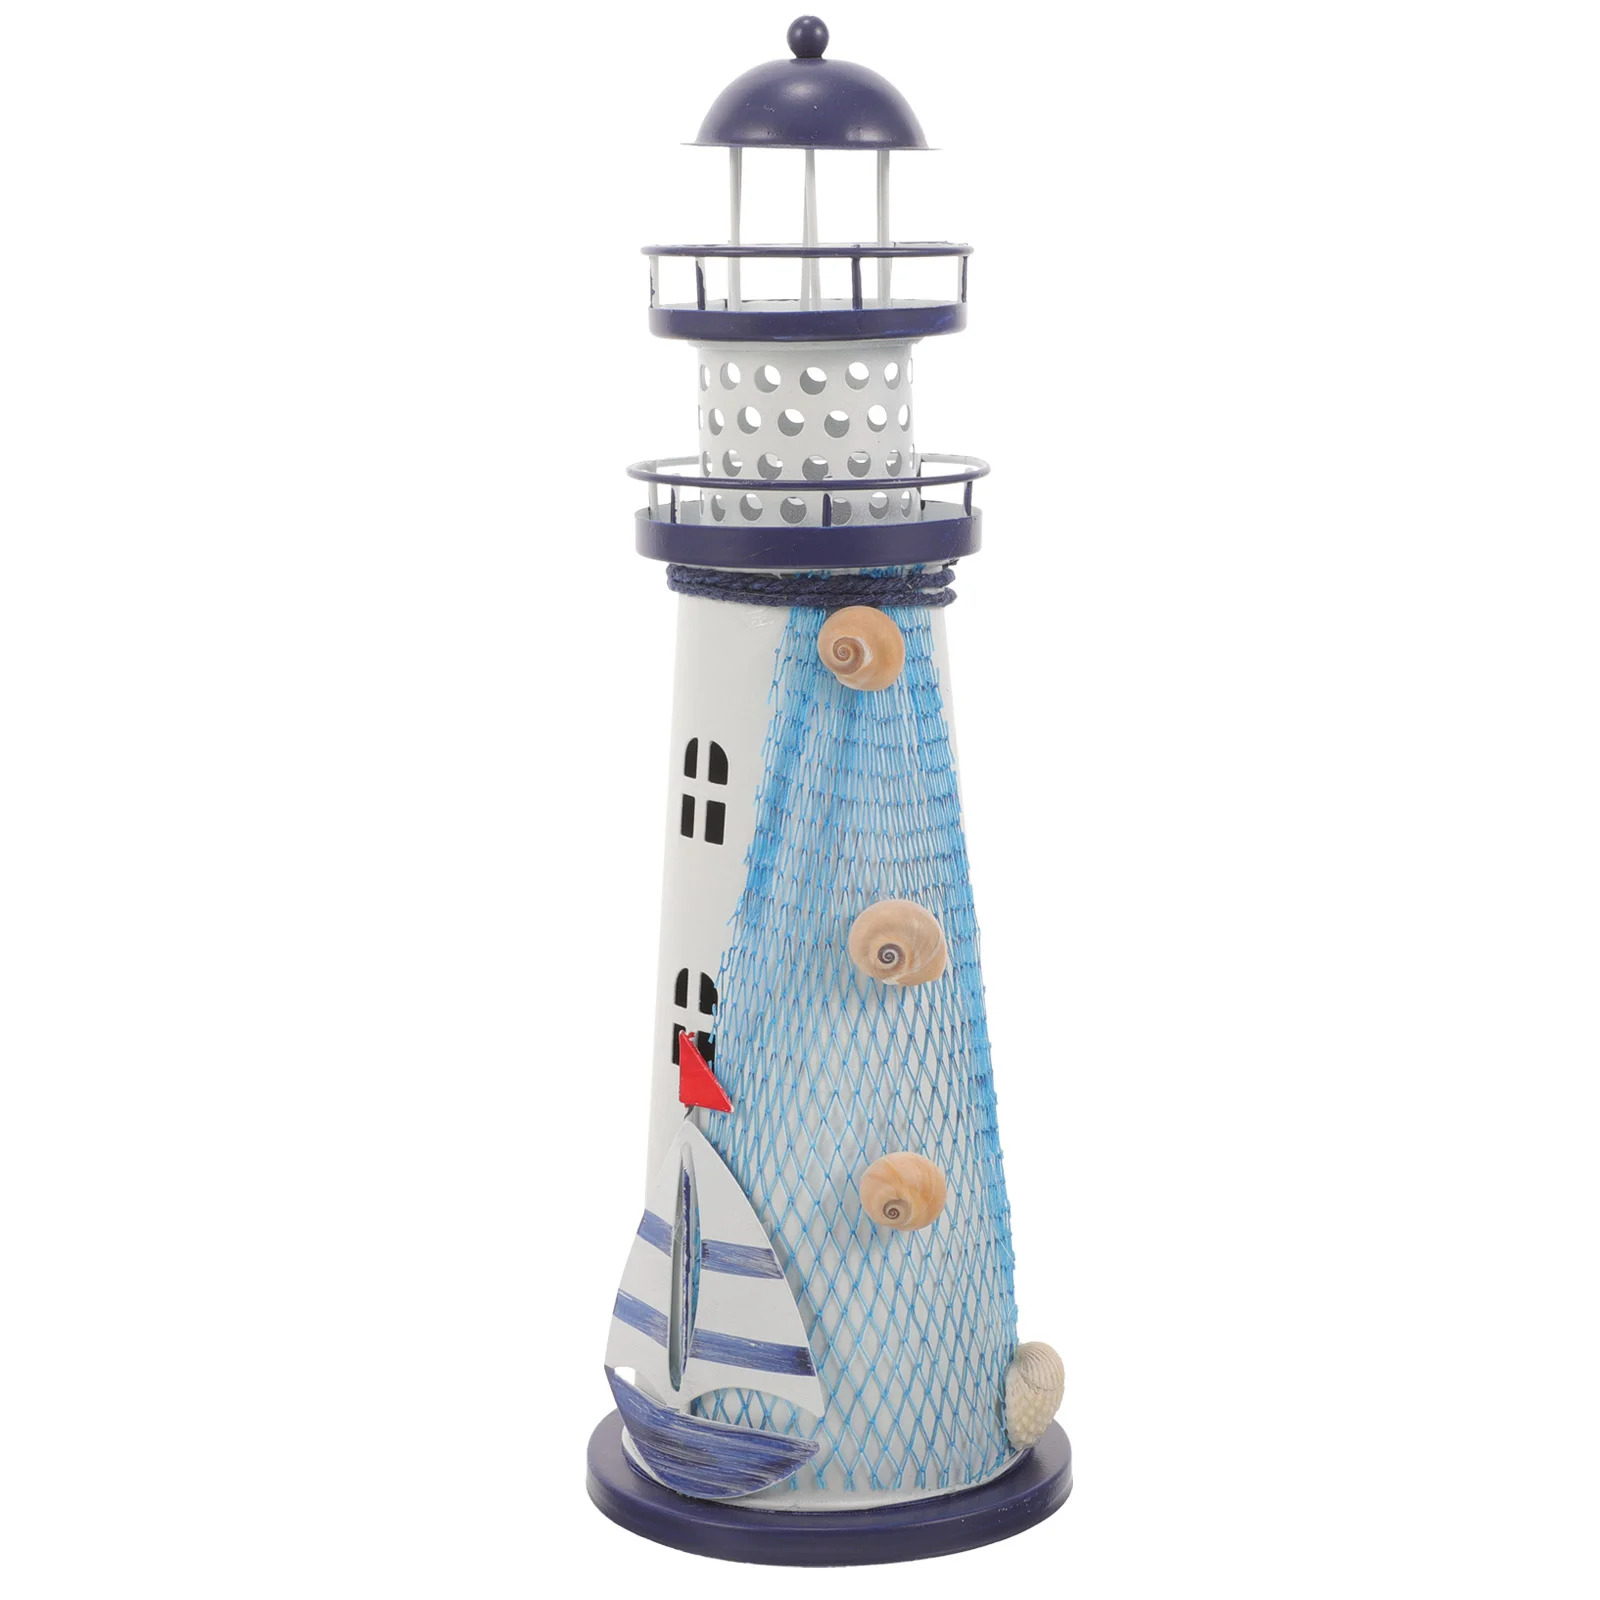 Nativity Ornament Nautical Desk Accessories Light House Decorations for Home Lighthouse Iron Boat Mediterranean Lamp free shipping 50pcs lot round metal hang decorations for chiristmas ornament dye sublimation transfer sublimation blanks